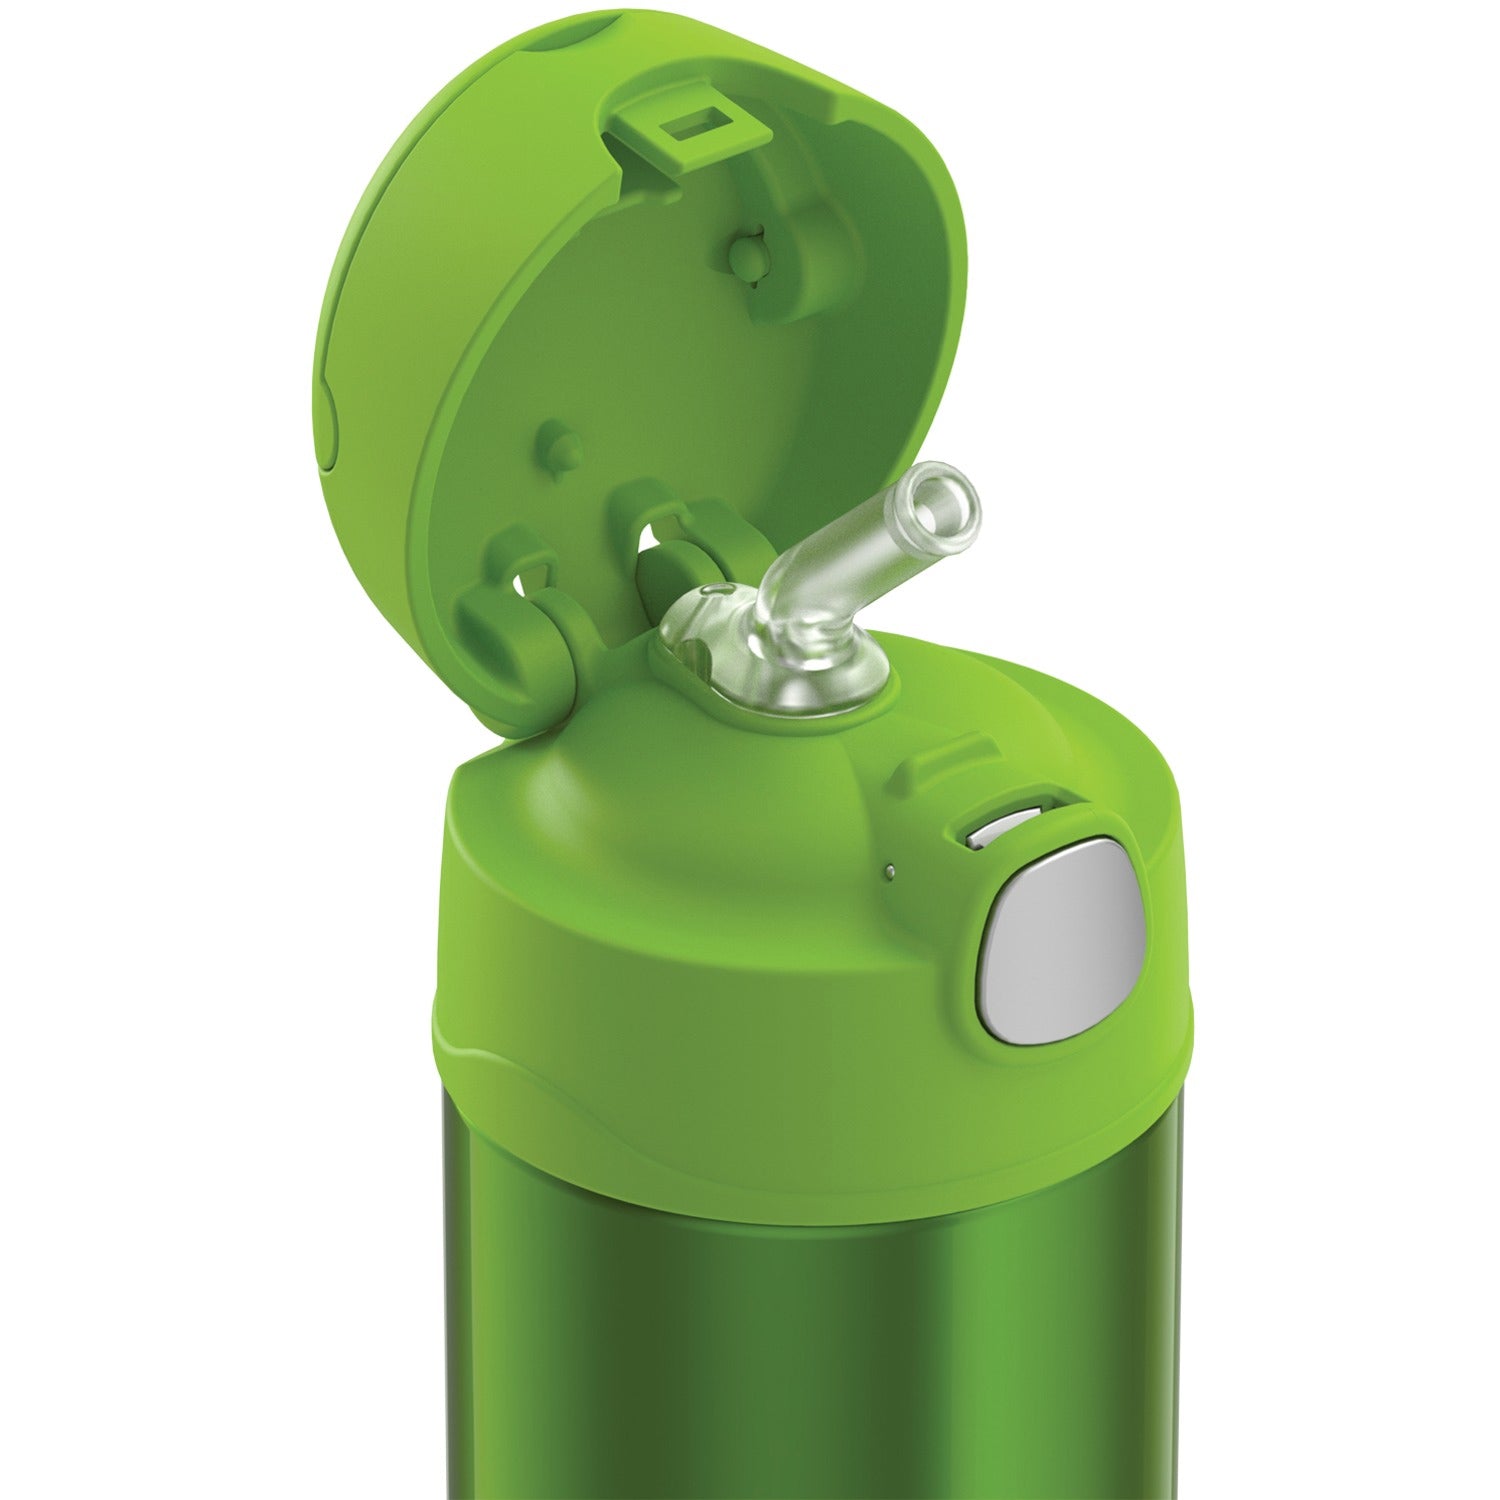 Thermos 12-Ounce Stainless Steel FUNtainer Bottle (Lime Green)